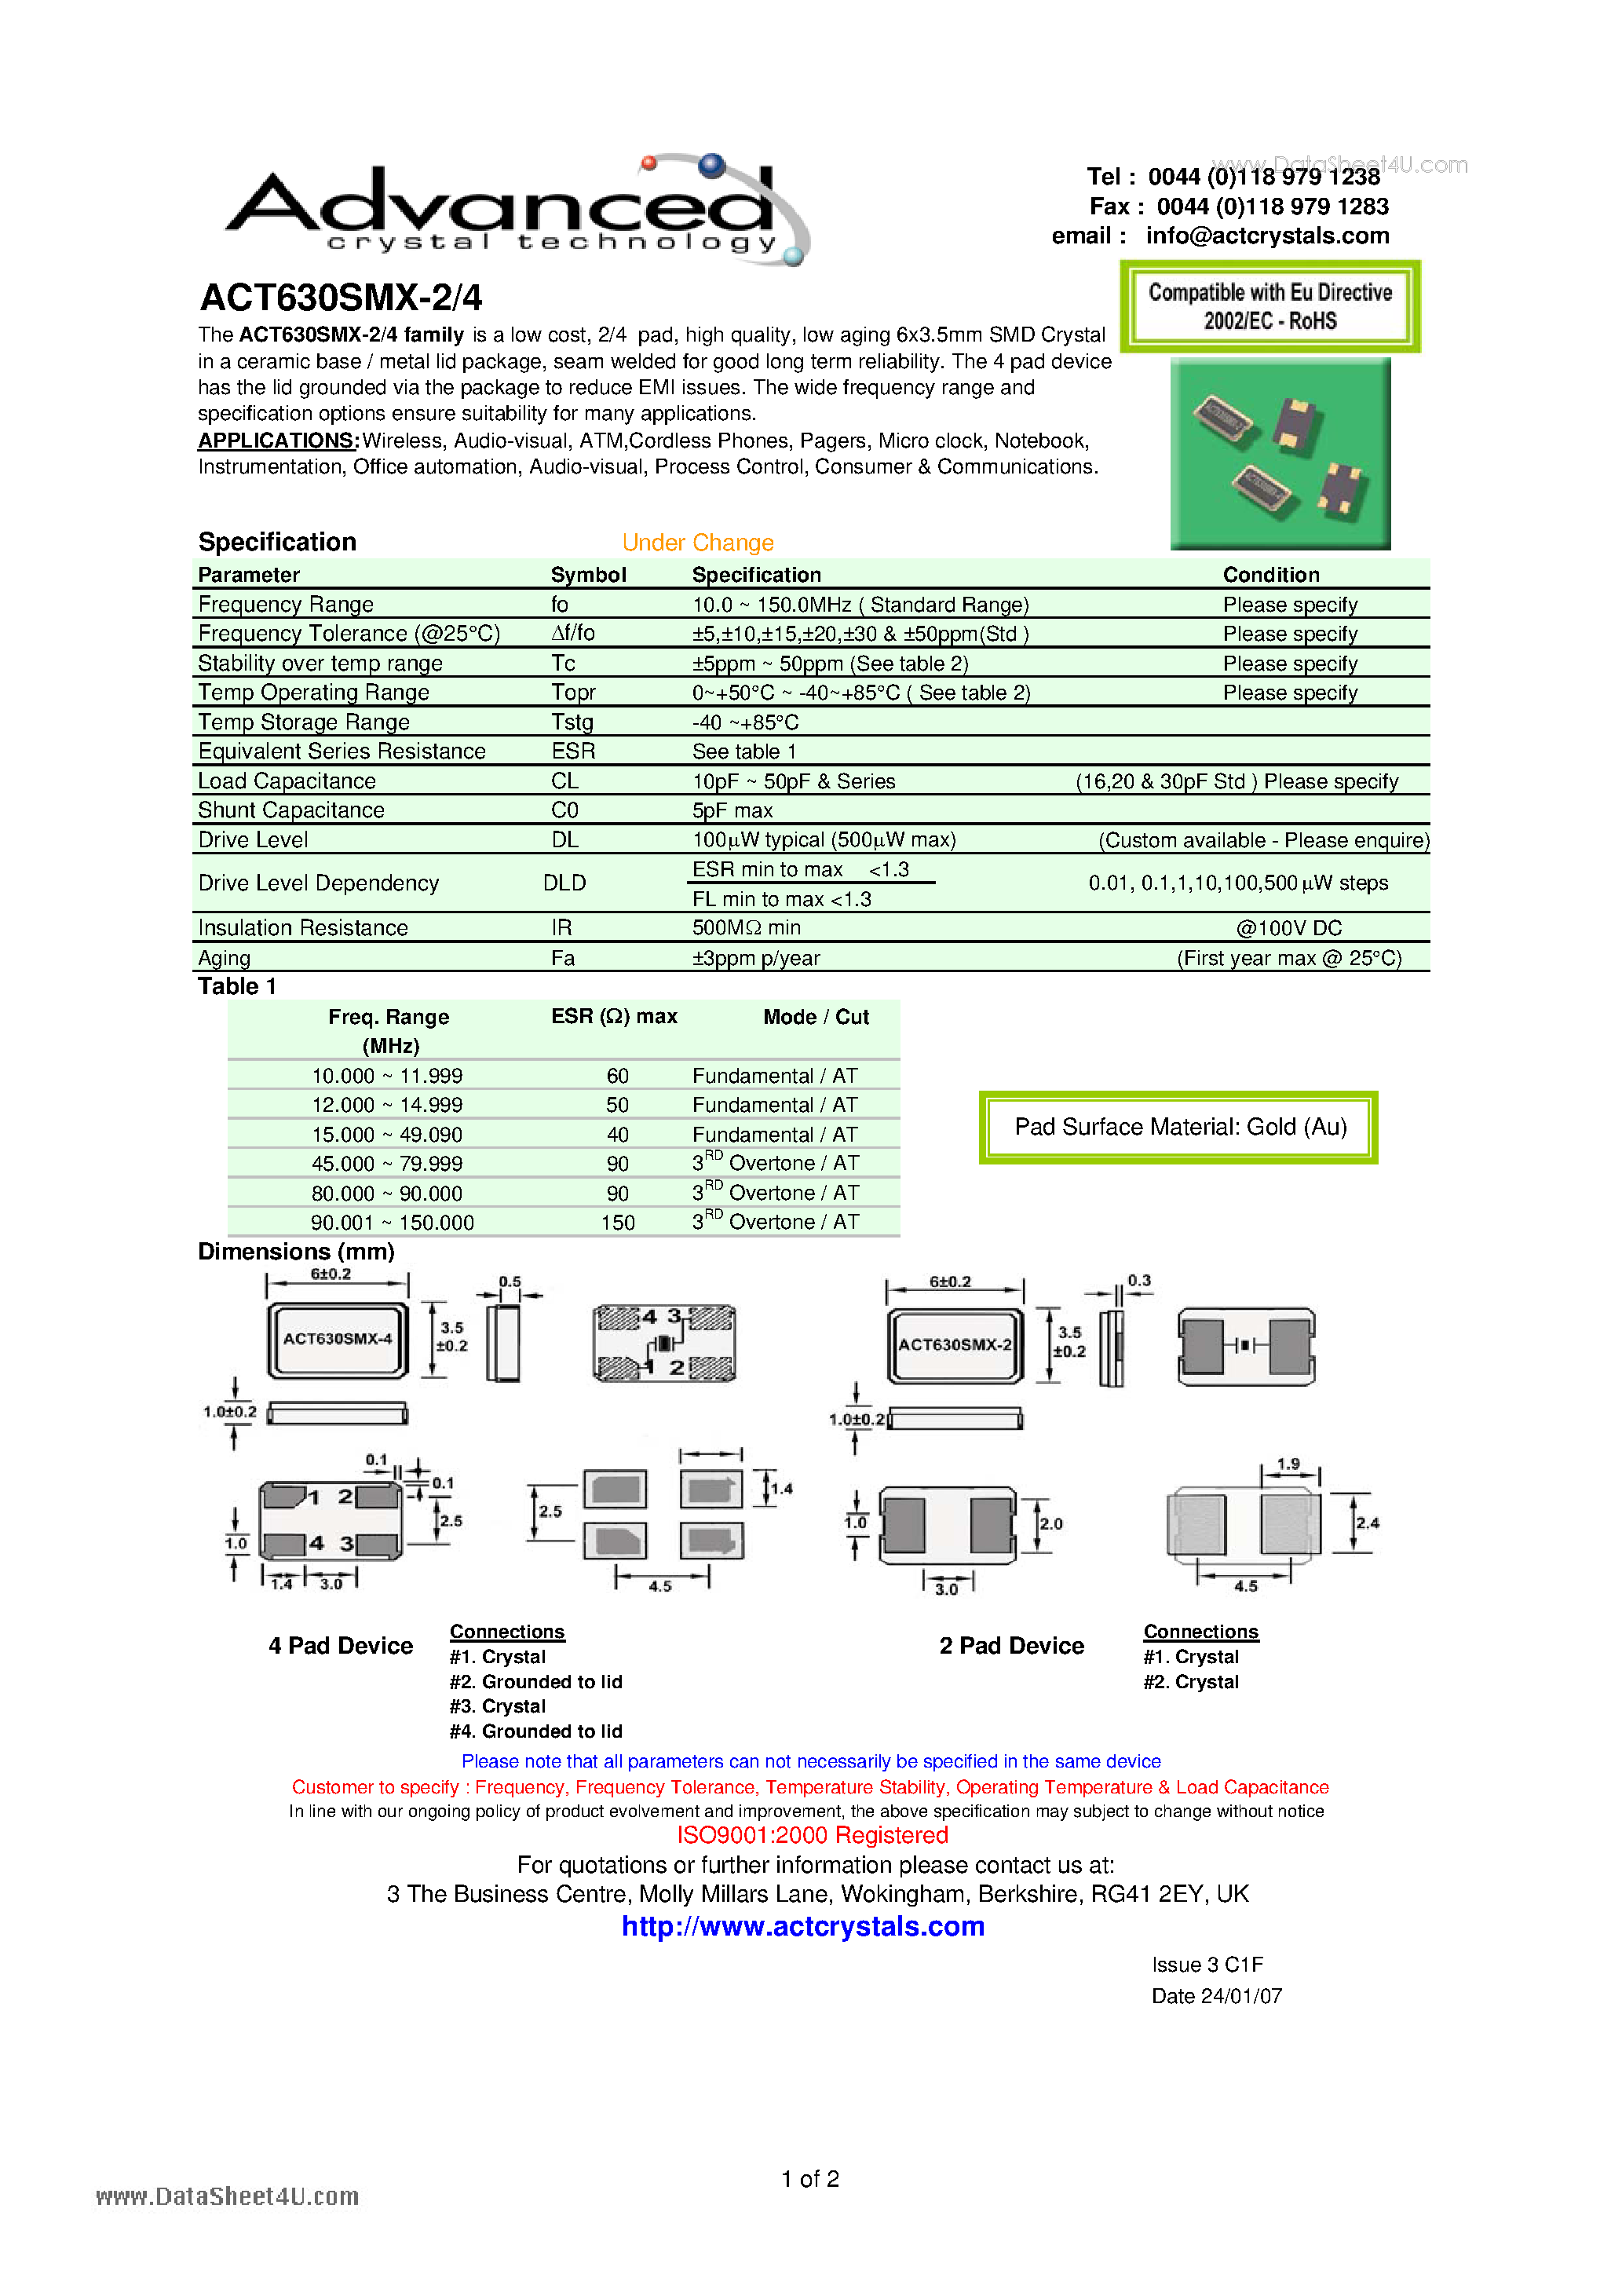 Datasheet ACT630SMX-2 - (ACT630SMX-2/4) low aging 6x3.5mm SMD Crystal page 1